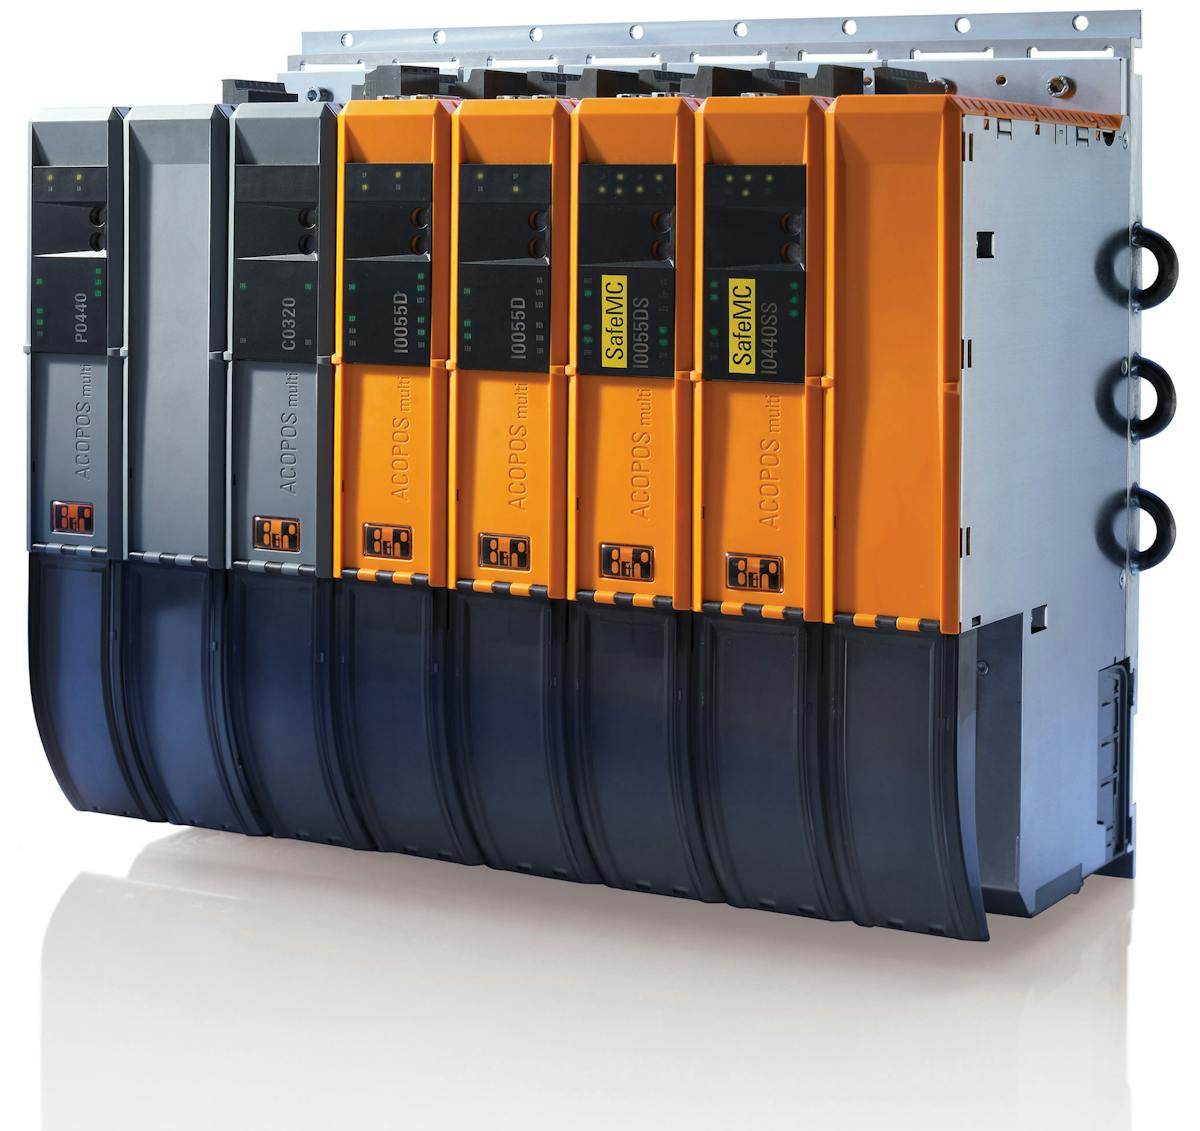 Compact drives. One thing Top Tier engineers and machine d